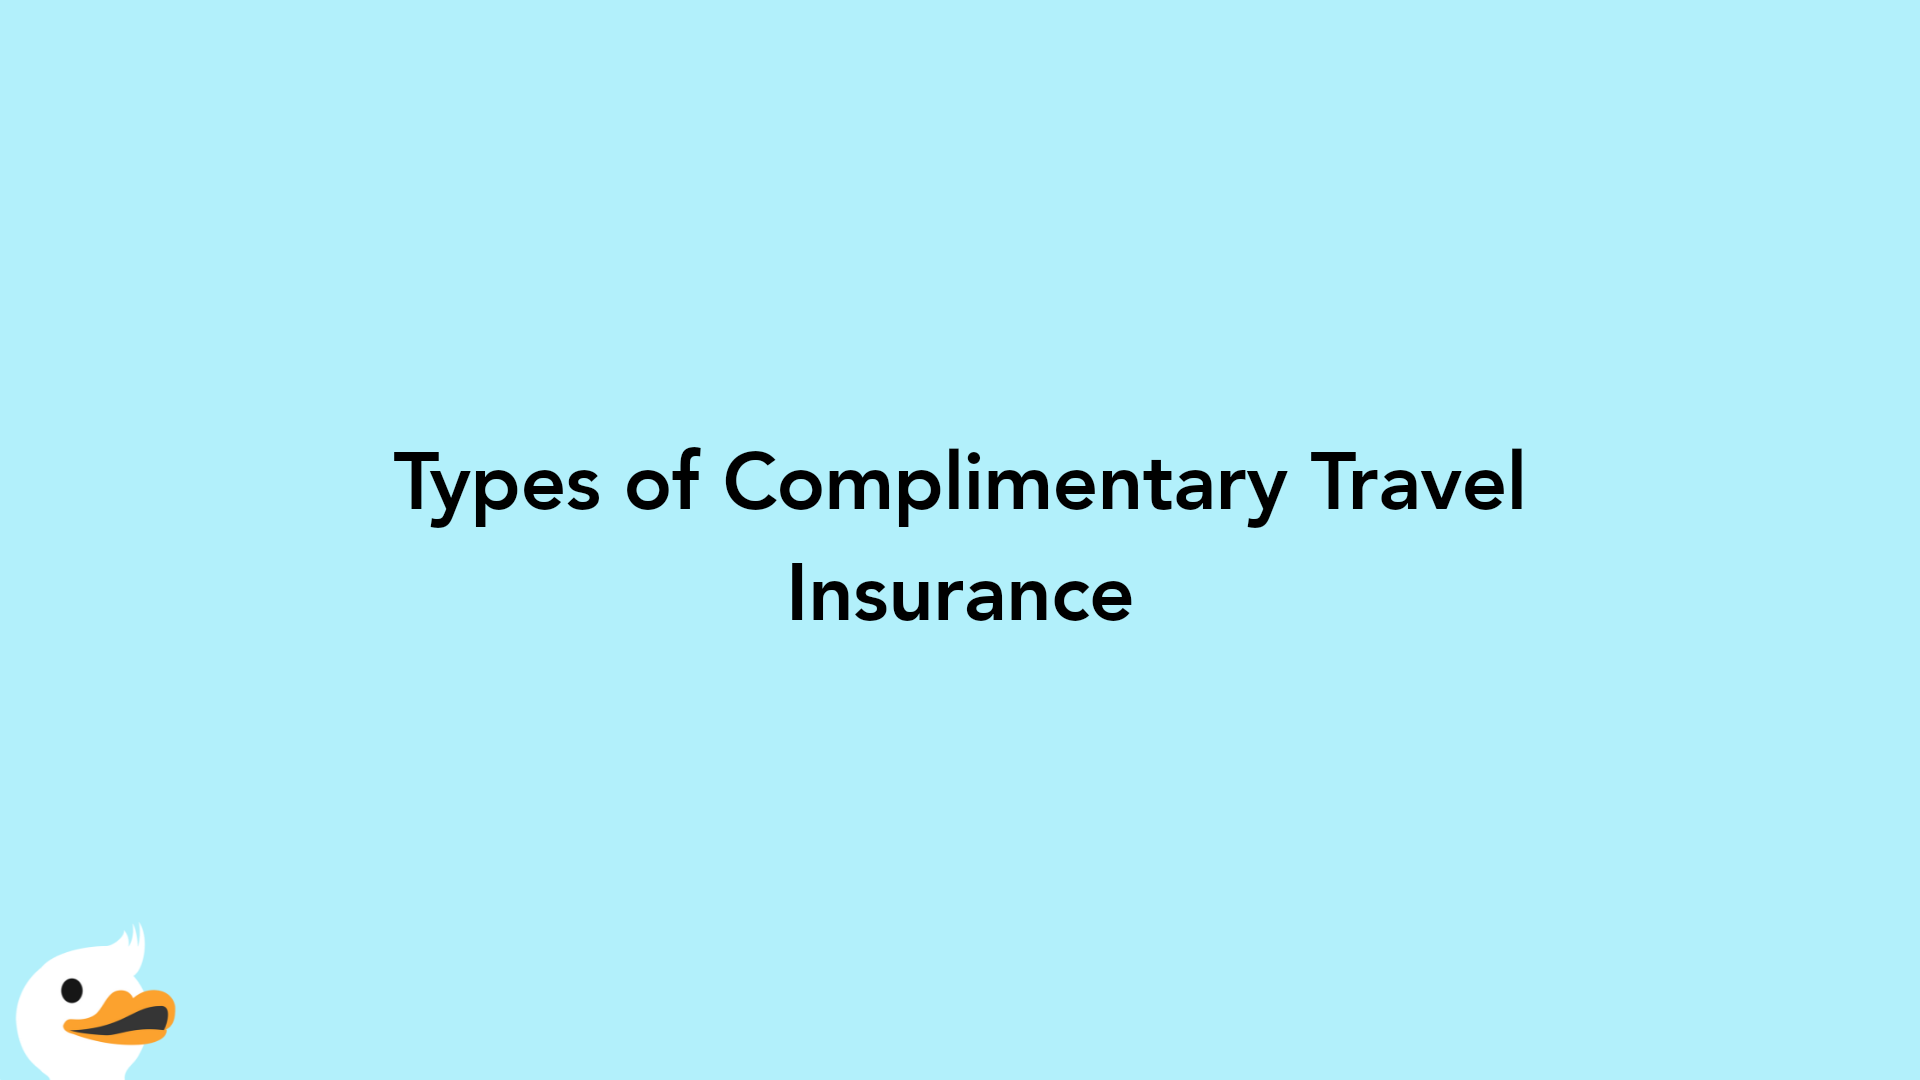 Types of Complimentary Travel Insurance